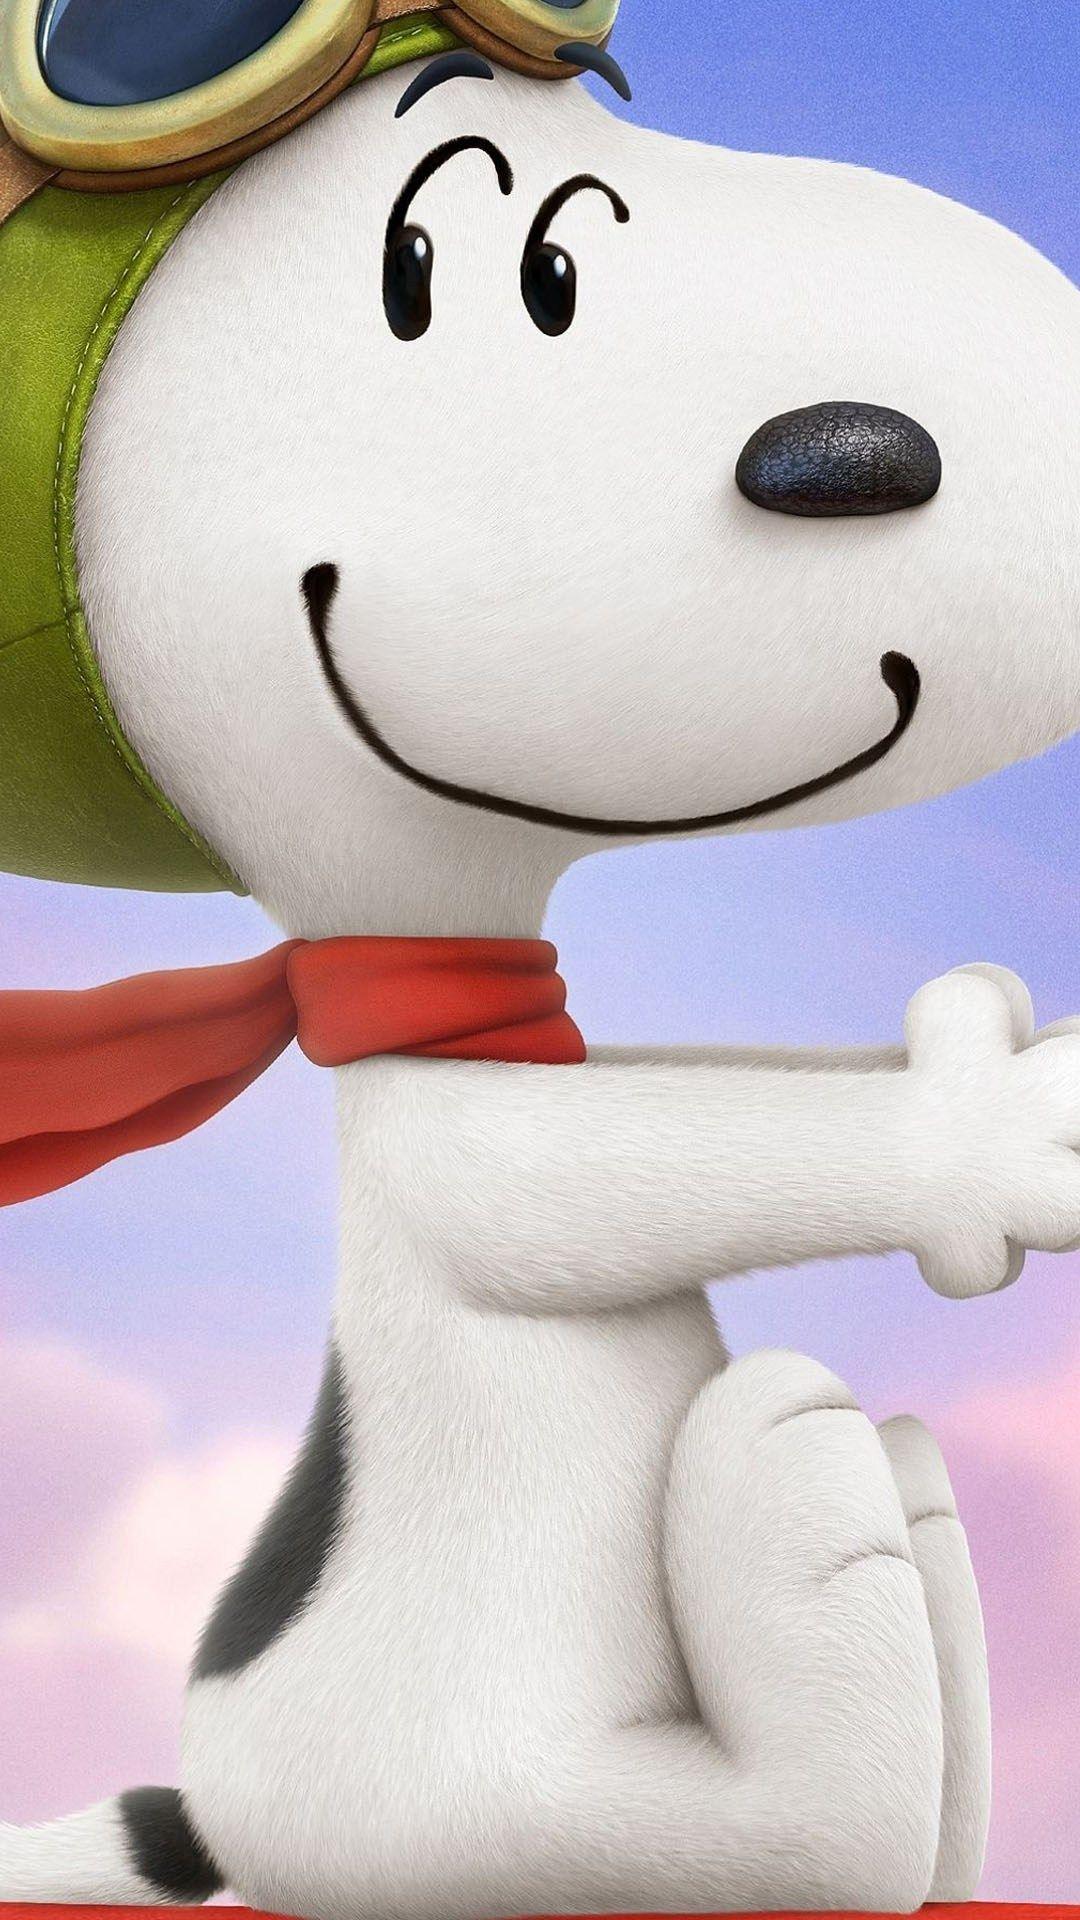 Snoopy Christmas wallpaper by ERlCA  Download on ZEDGE  b8e9